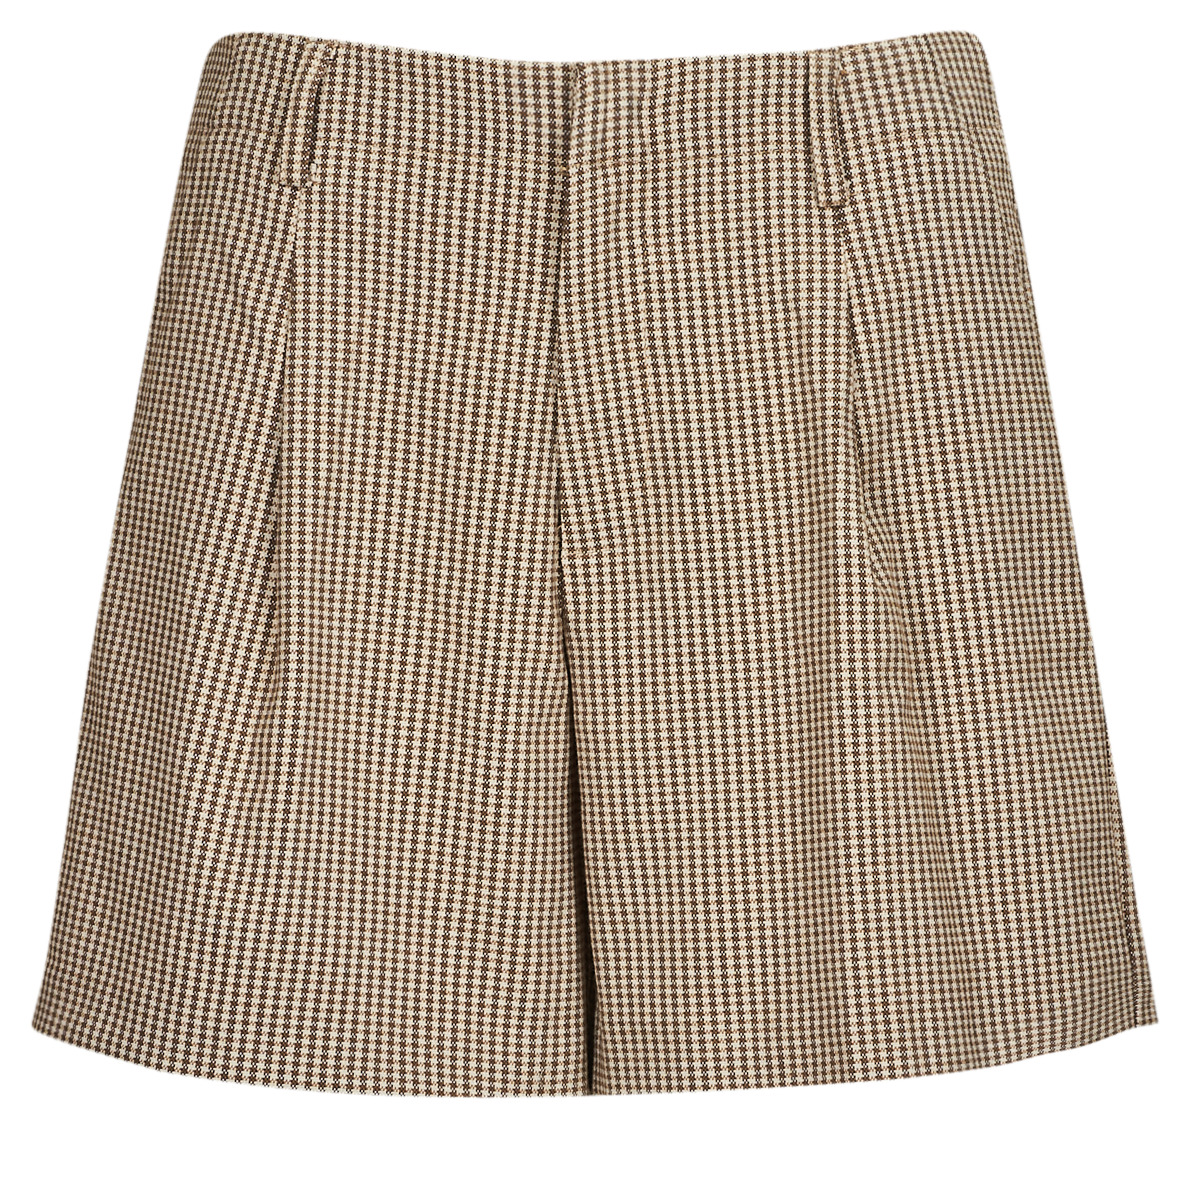 only  onlmolly hw check shorts tlr  women's shorts in beige